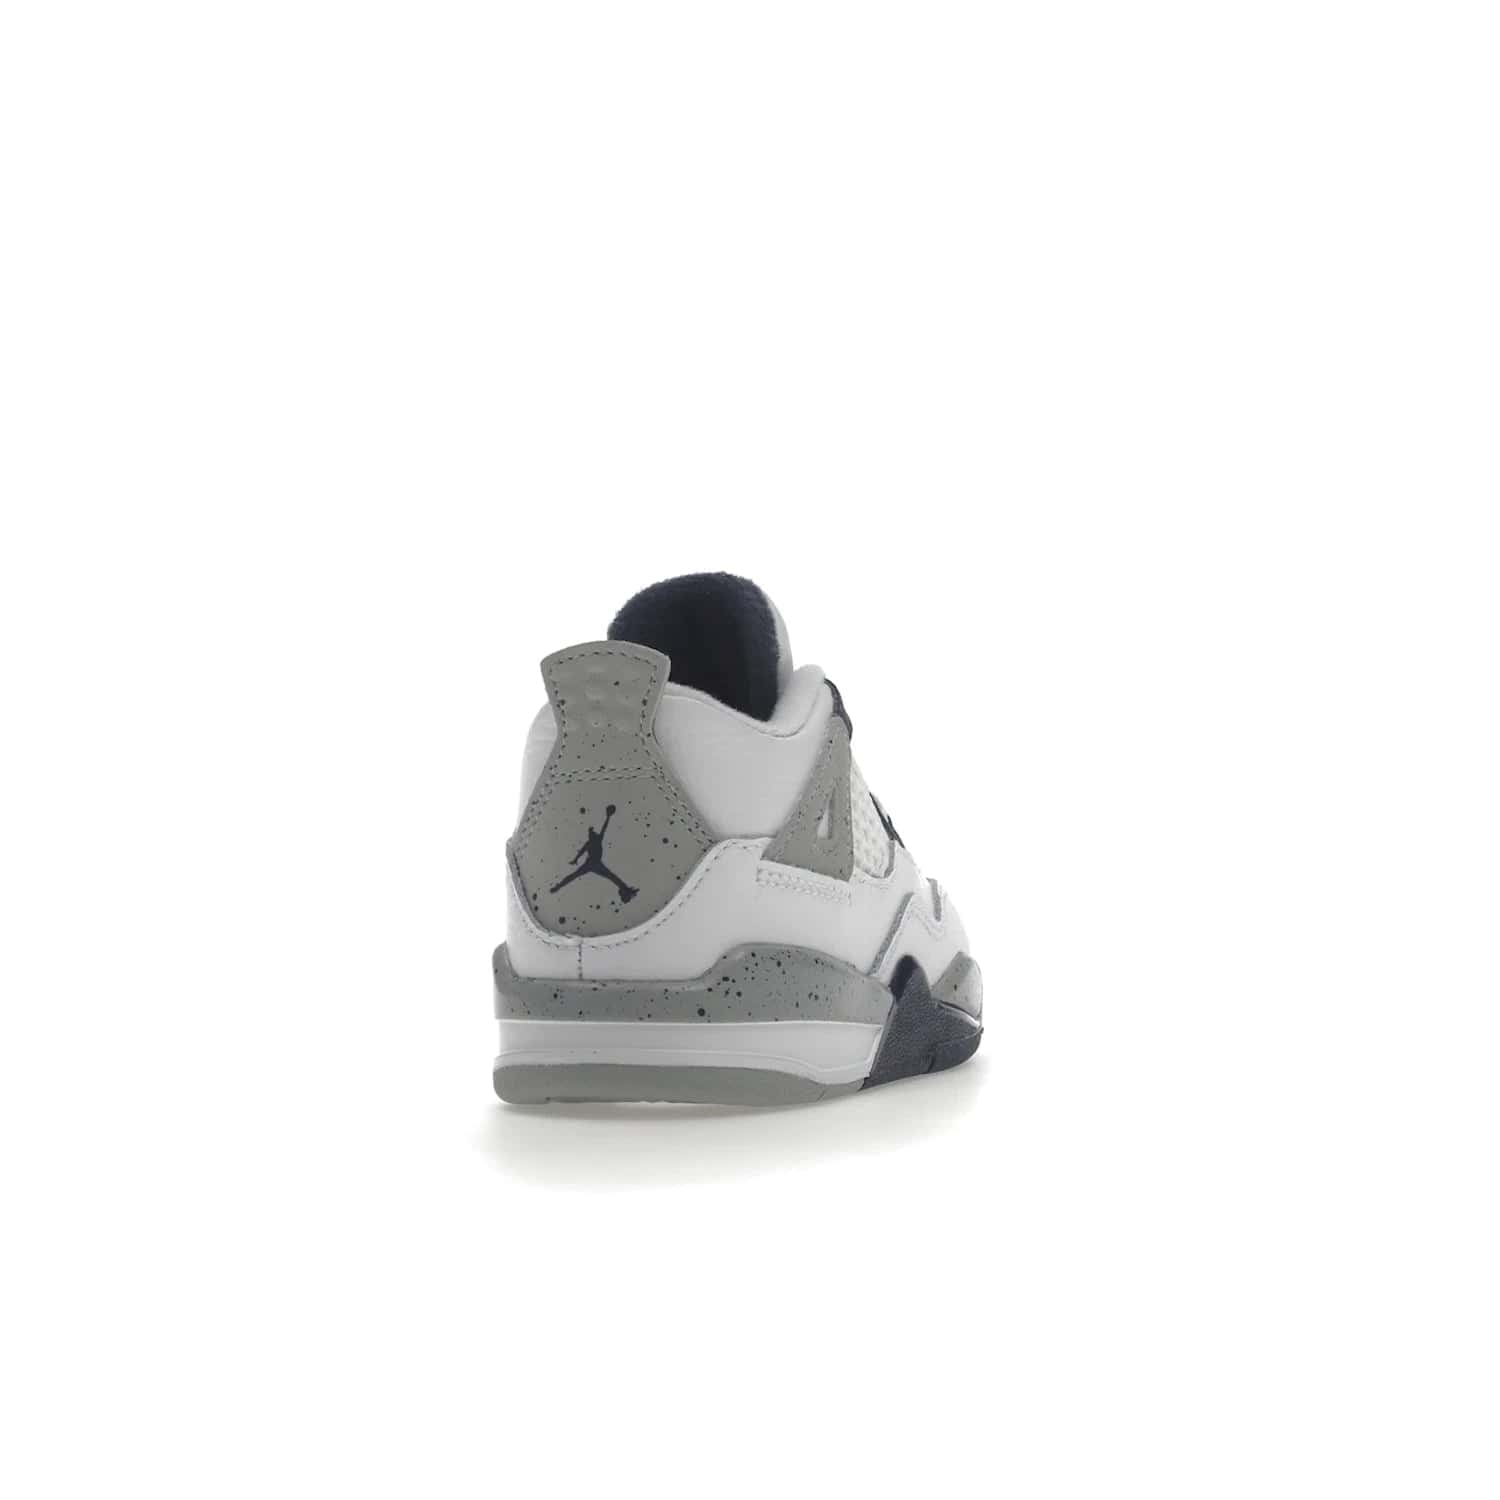 Jordan 4 Retro Midnight Navy (TD) - Image 30 - Only at www.BallersClubKickz.com - Introducing the Jordan 4 Retro Midnight Navy (TD) for kids. White leather upper with navy and grey accents plus fire red detailing. Perfect for everyday wear. Get yours before they sell out.